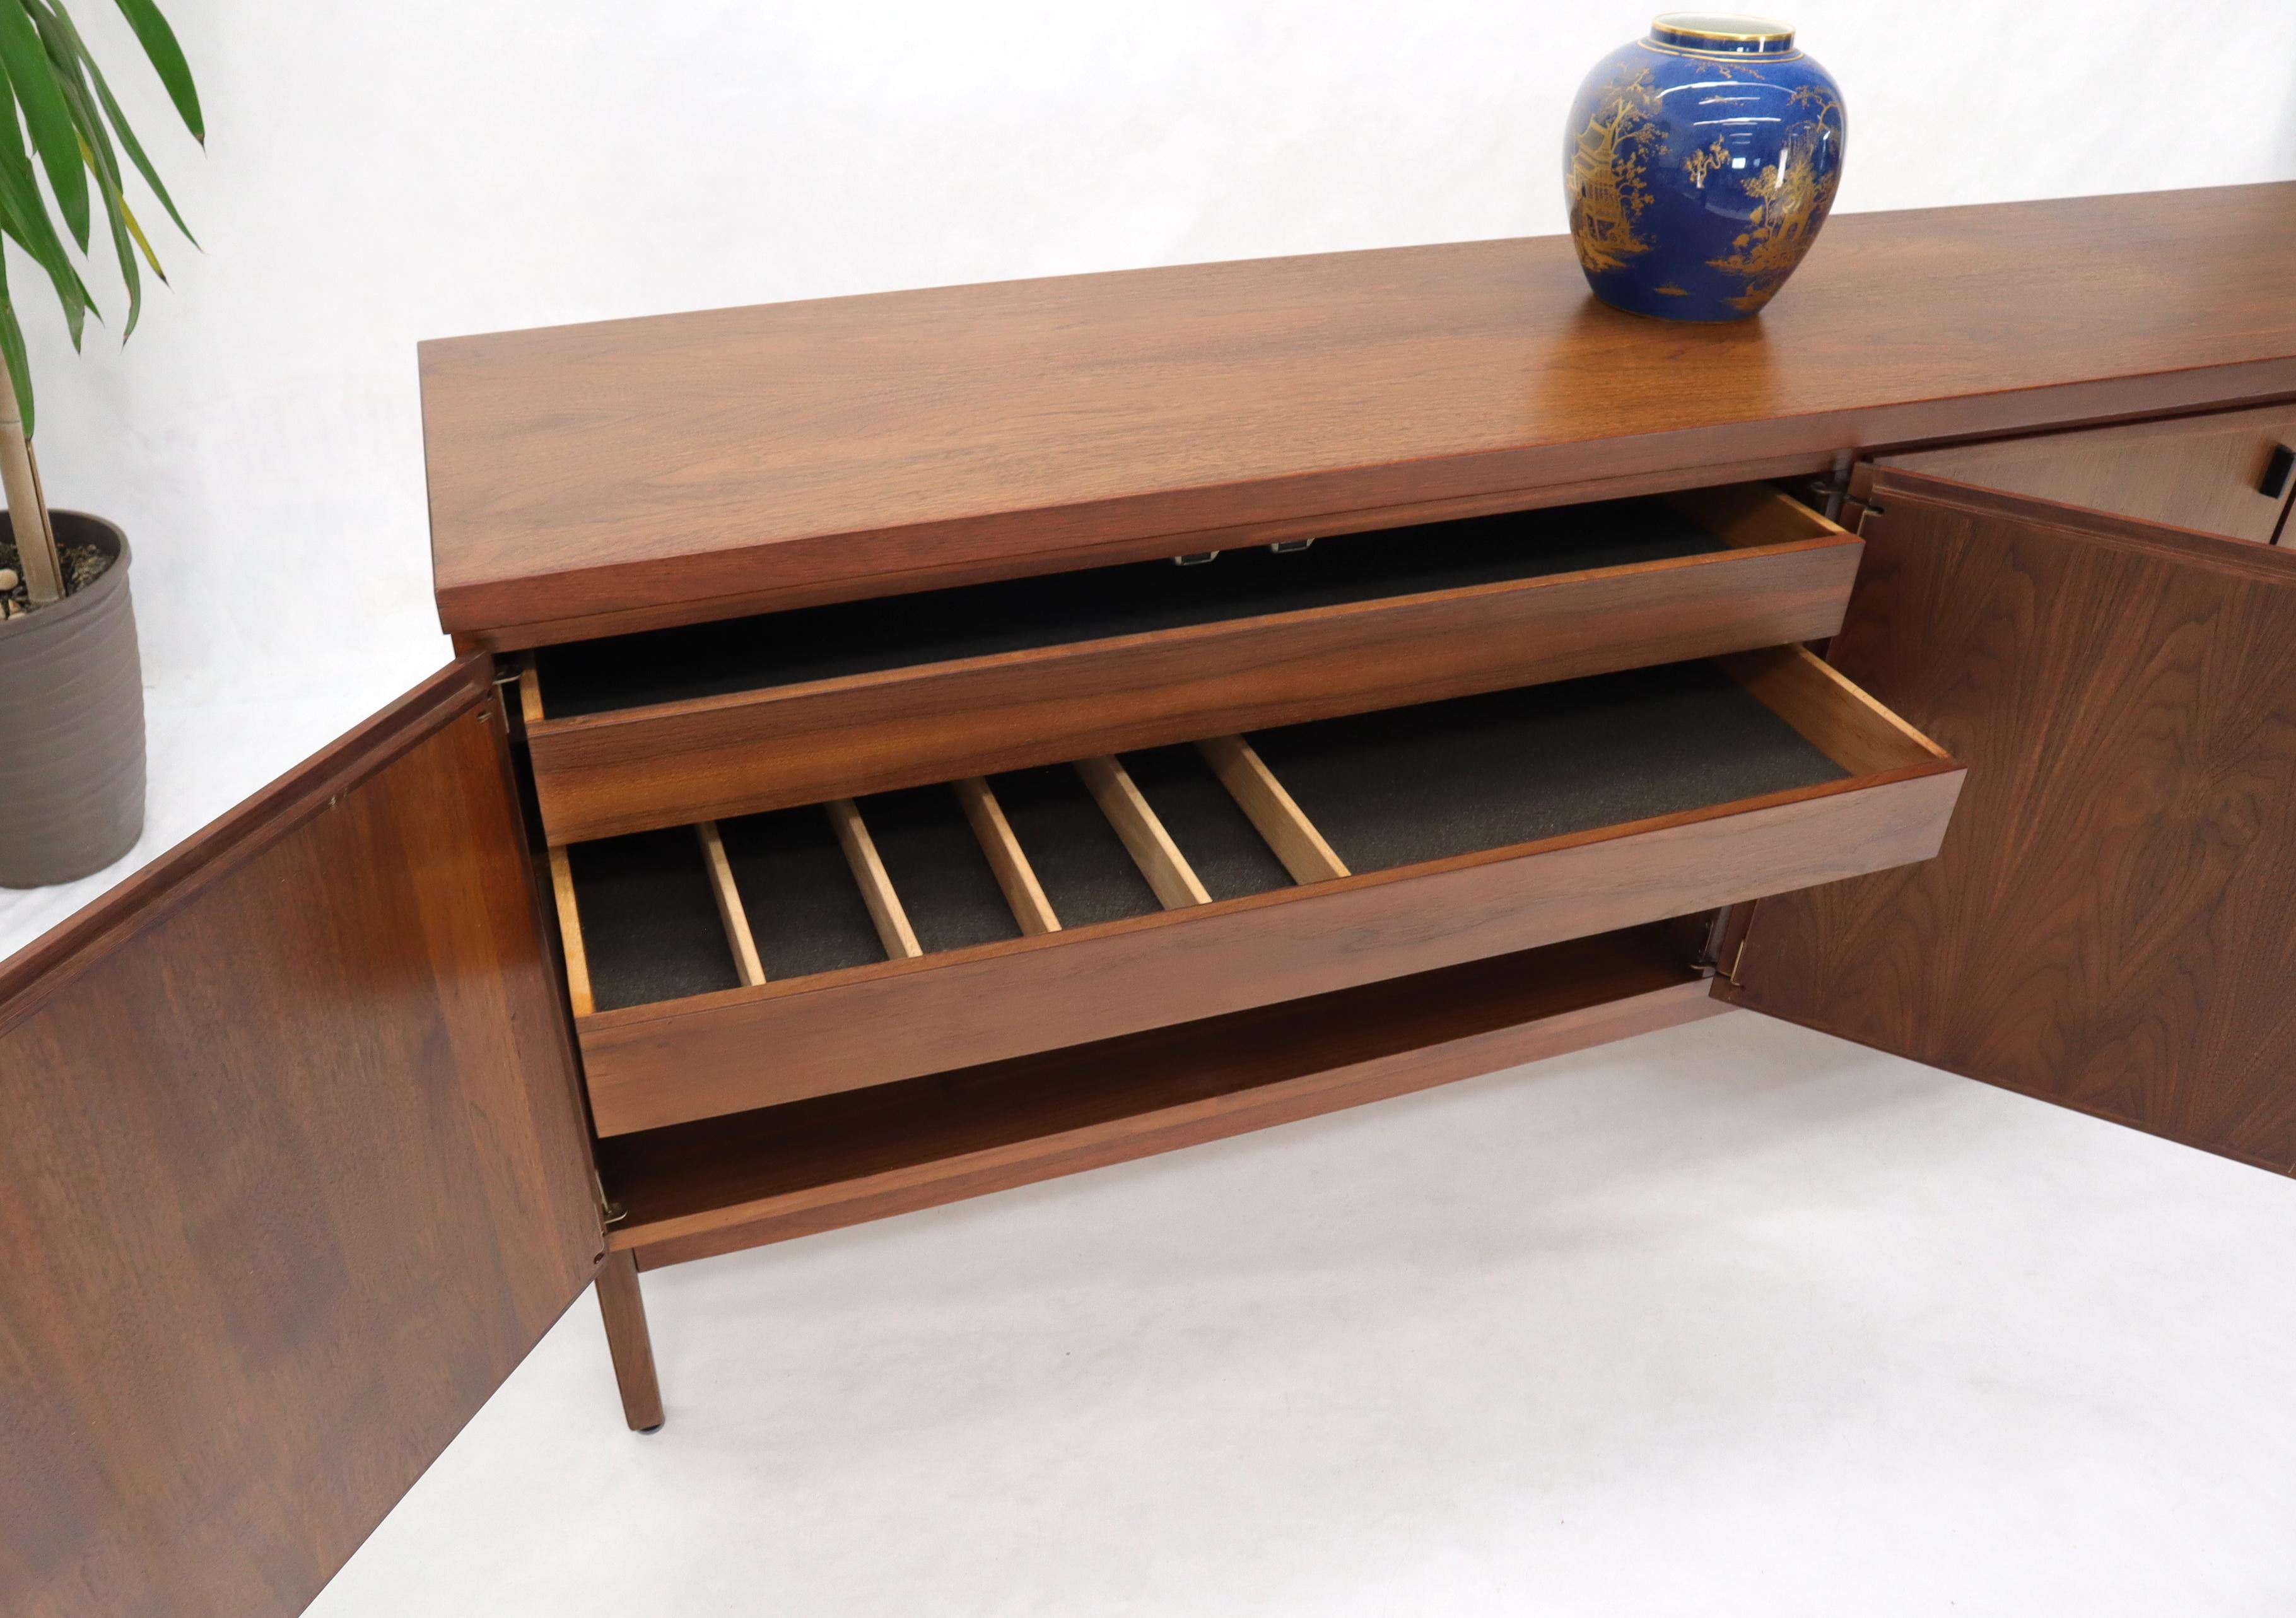 Oiled Walnut Four Doors Compartment Long Credenza